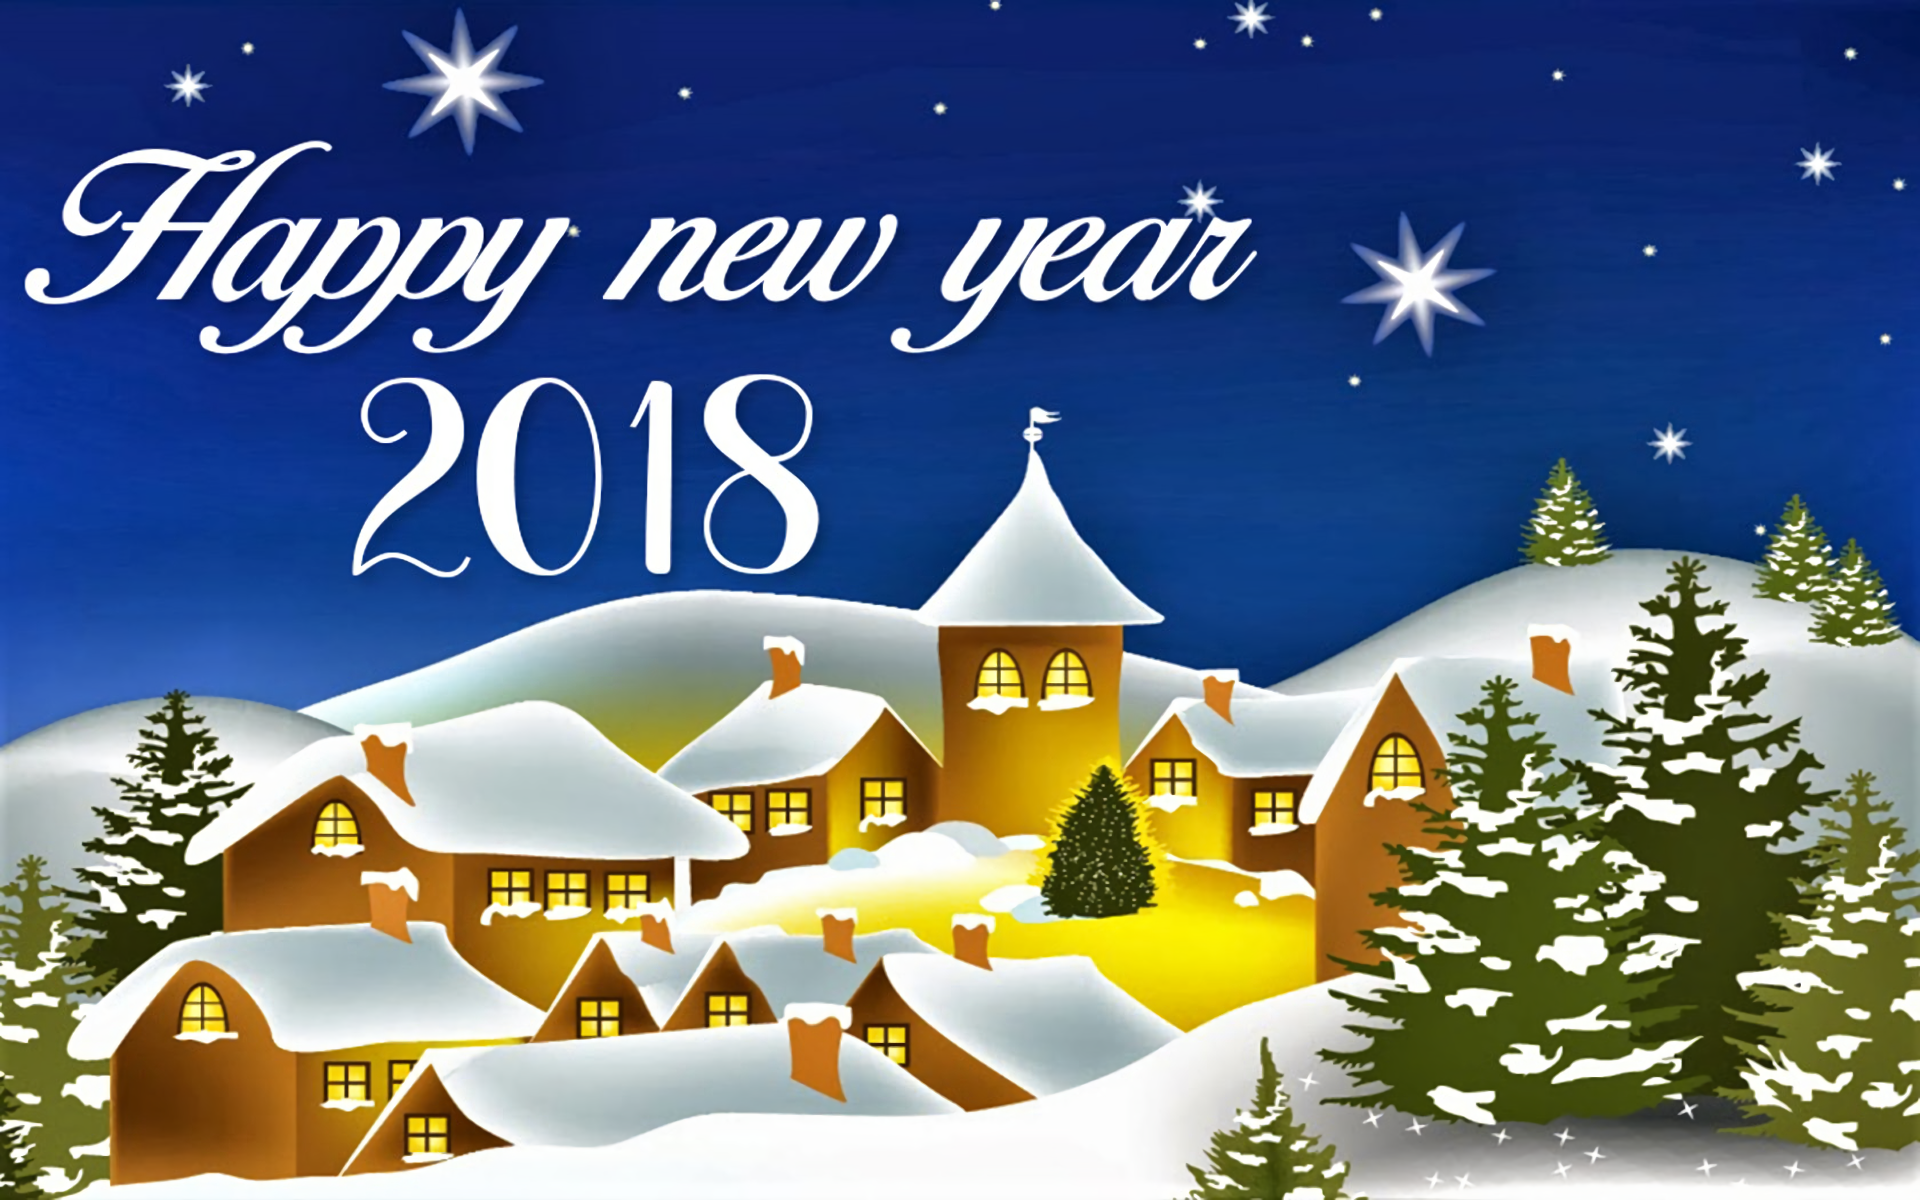 Happy New Year Holiday New Year New Year 2018 Snow Village Winter 1920x1200